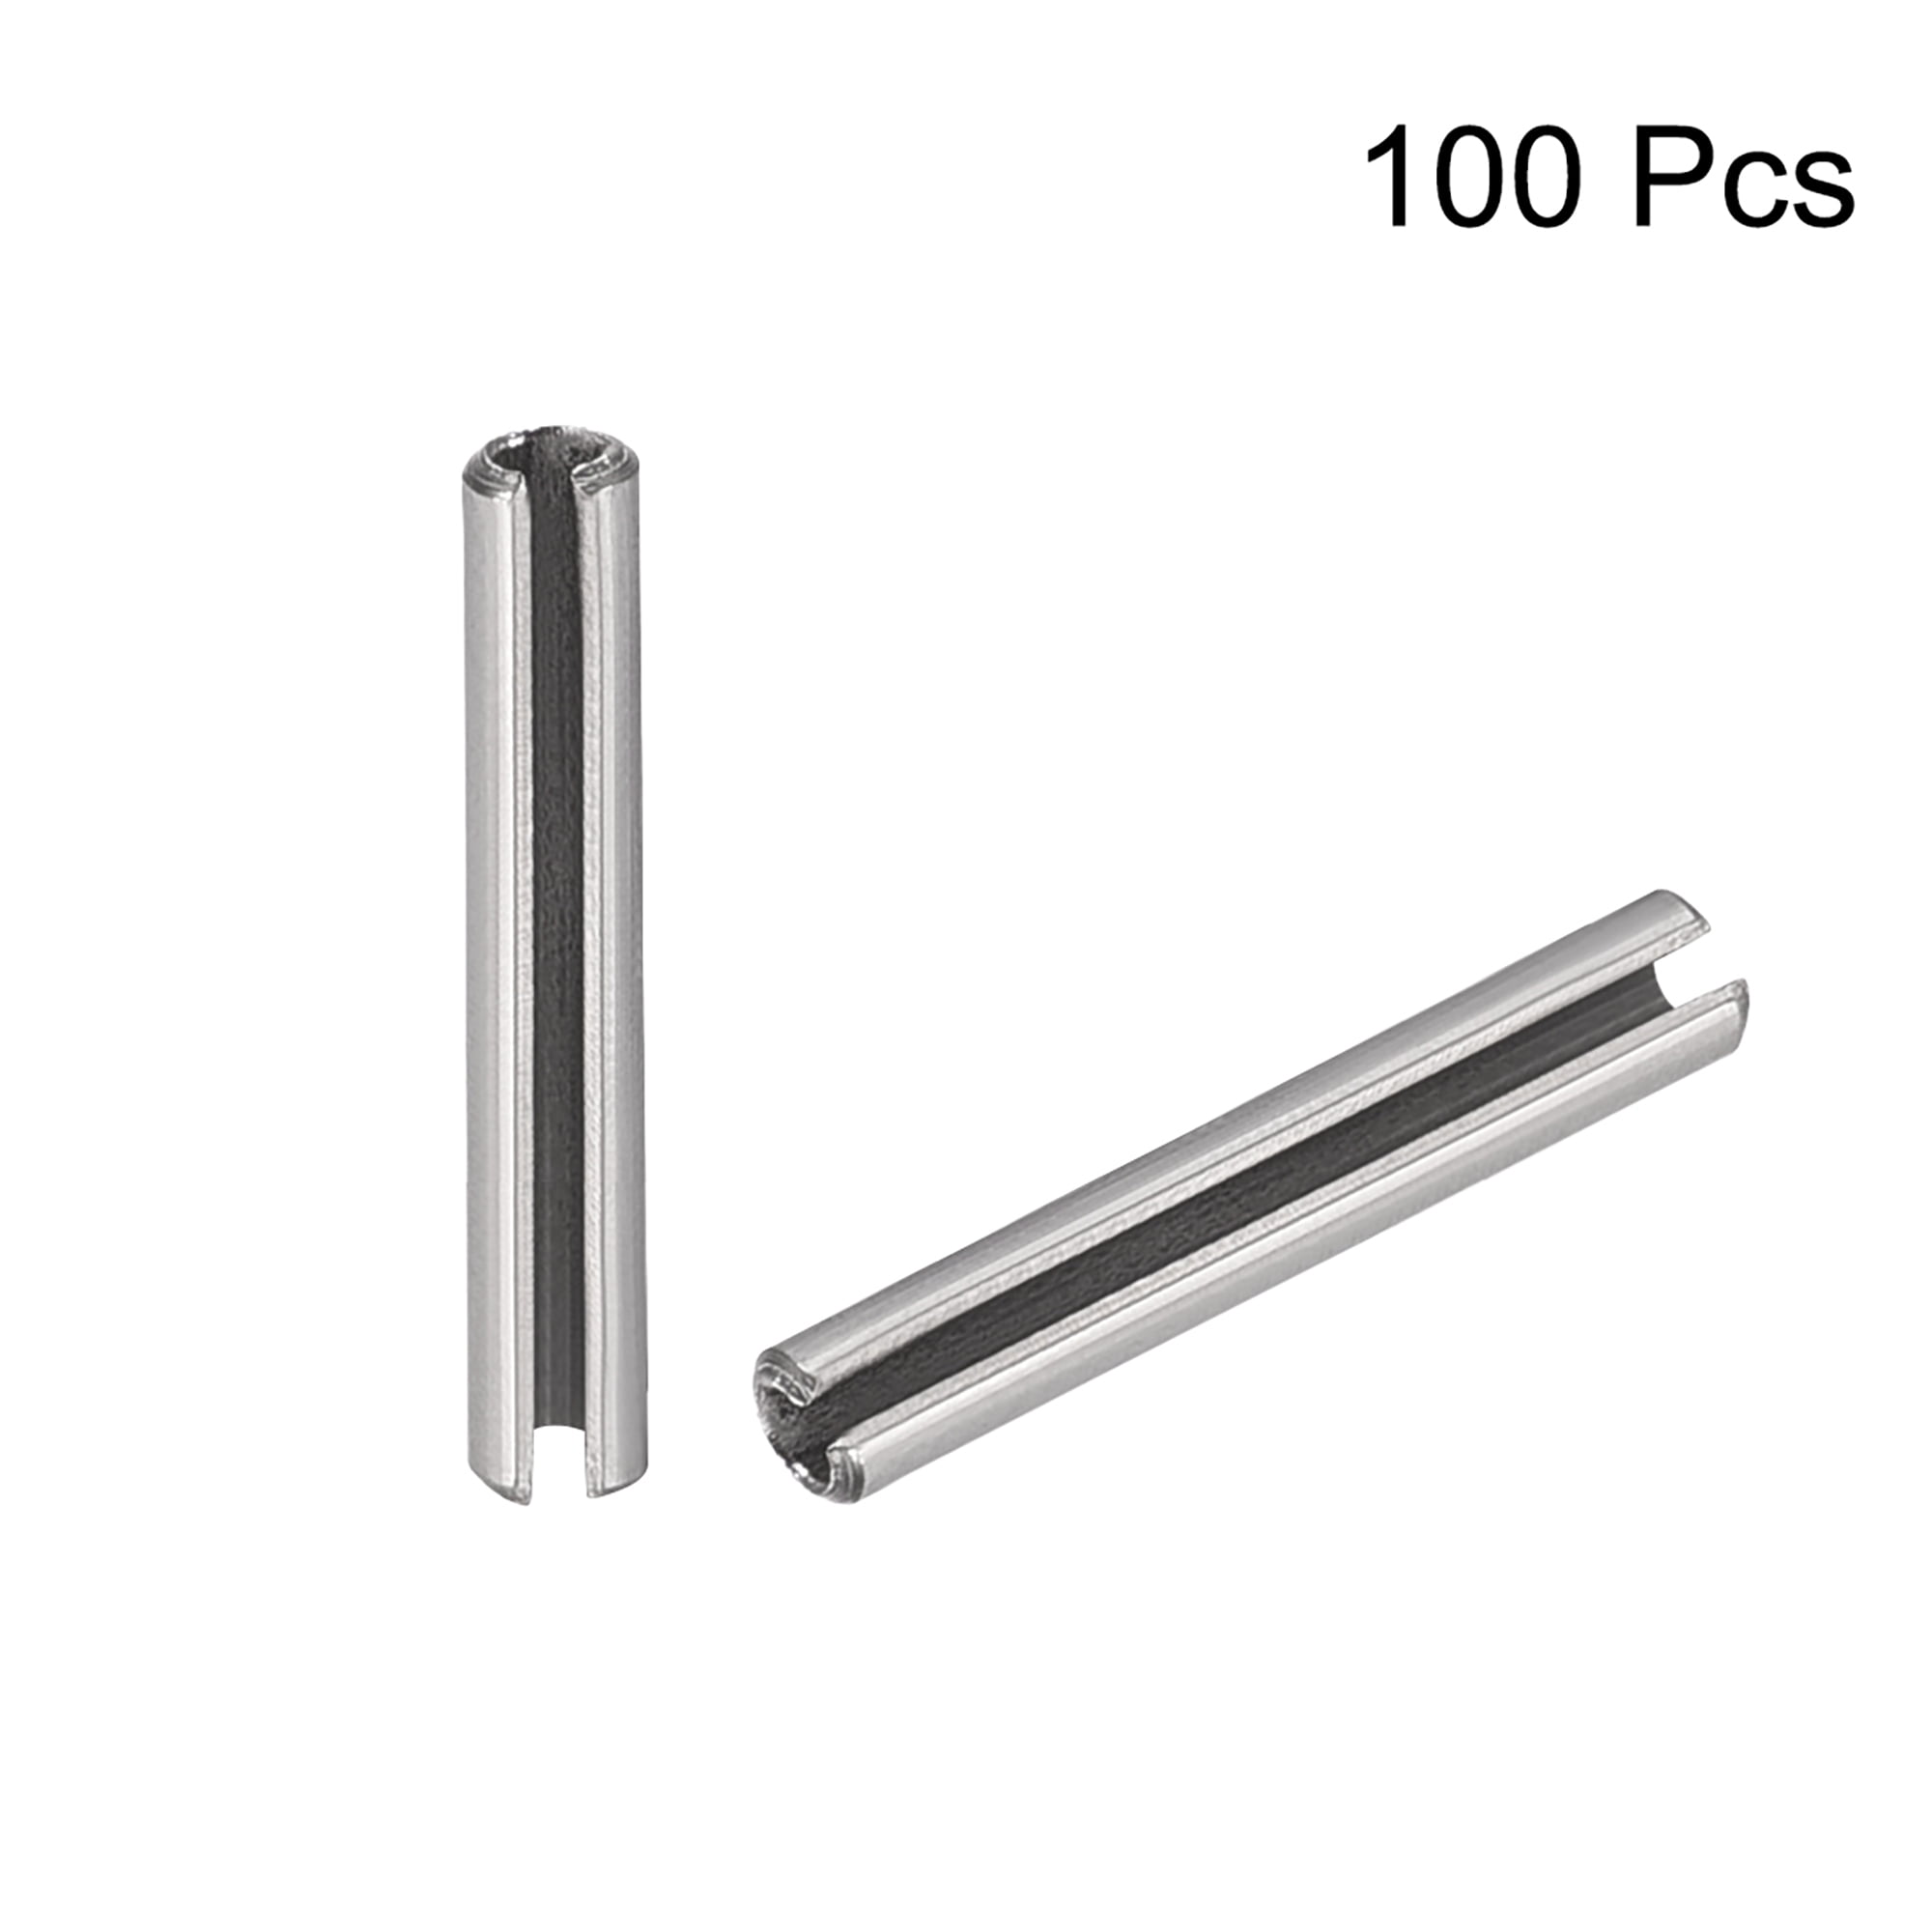 100 NEW 1/16" X 7/8" 420 STAINLESS STEEL SPRING ROLL PINS SLOTTED FREE SHIP NH 